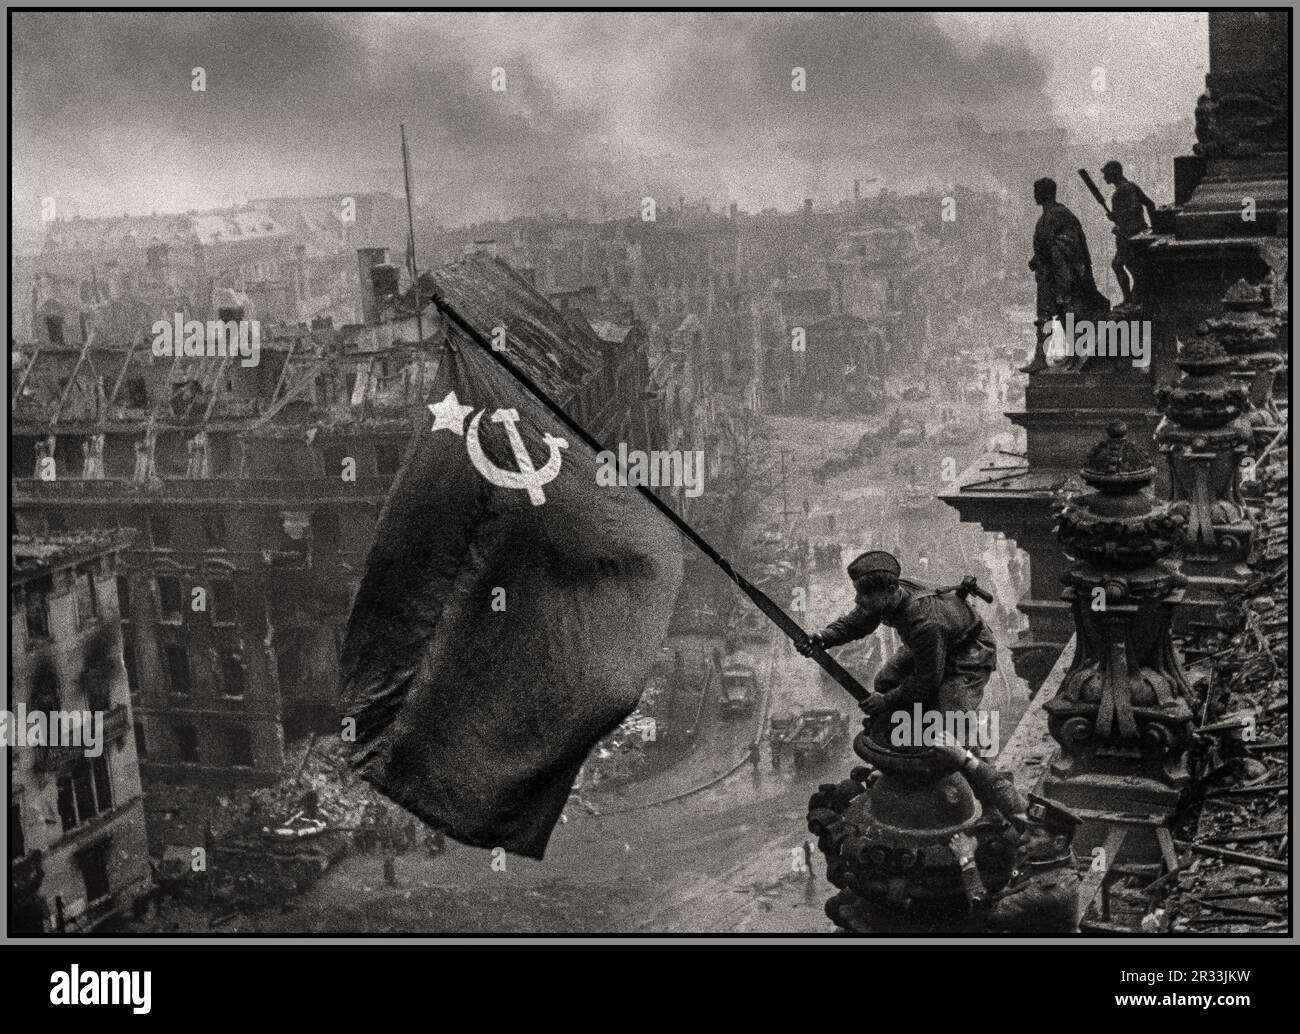 RUSSIAN FLAG BERLIN REICHSTAG World War 2 Germany Raising a flag over the Reichstag is a historic iconic World War II photograph, taken during the Battle of Berlin on 2 May 1945. It shows Meliton Kantaria and Mikhail Yegorov raising the Russian Hammer and Sickle flag over the Berlin Reichstag Berlin Germany Stock Photo